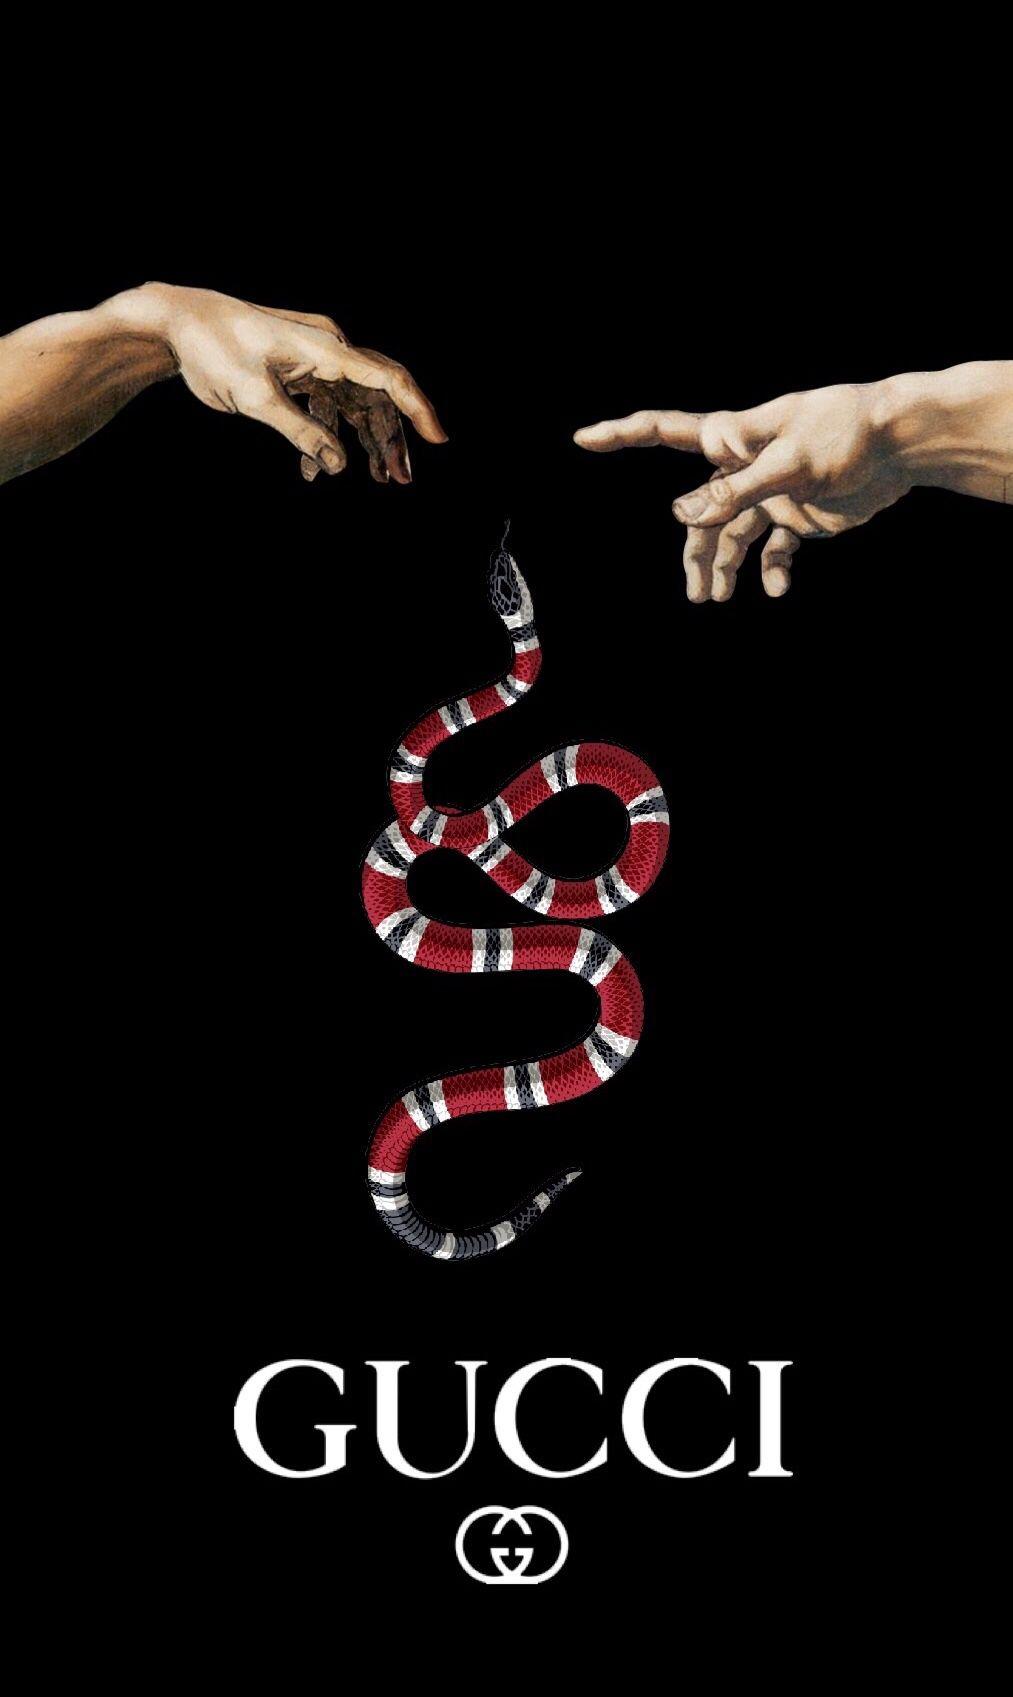 Gucci Snake with The Creation of Adam Wallpaper. Gucci